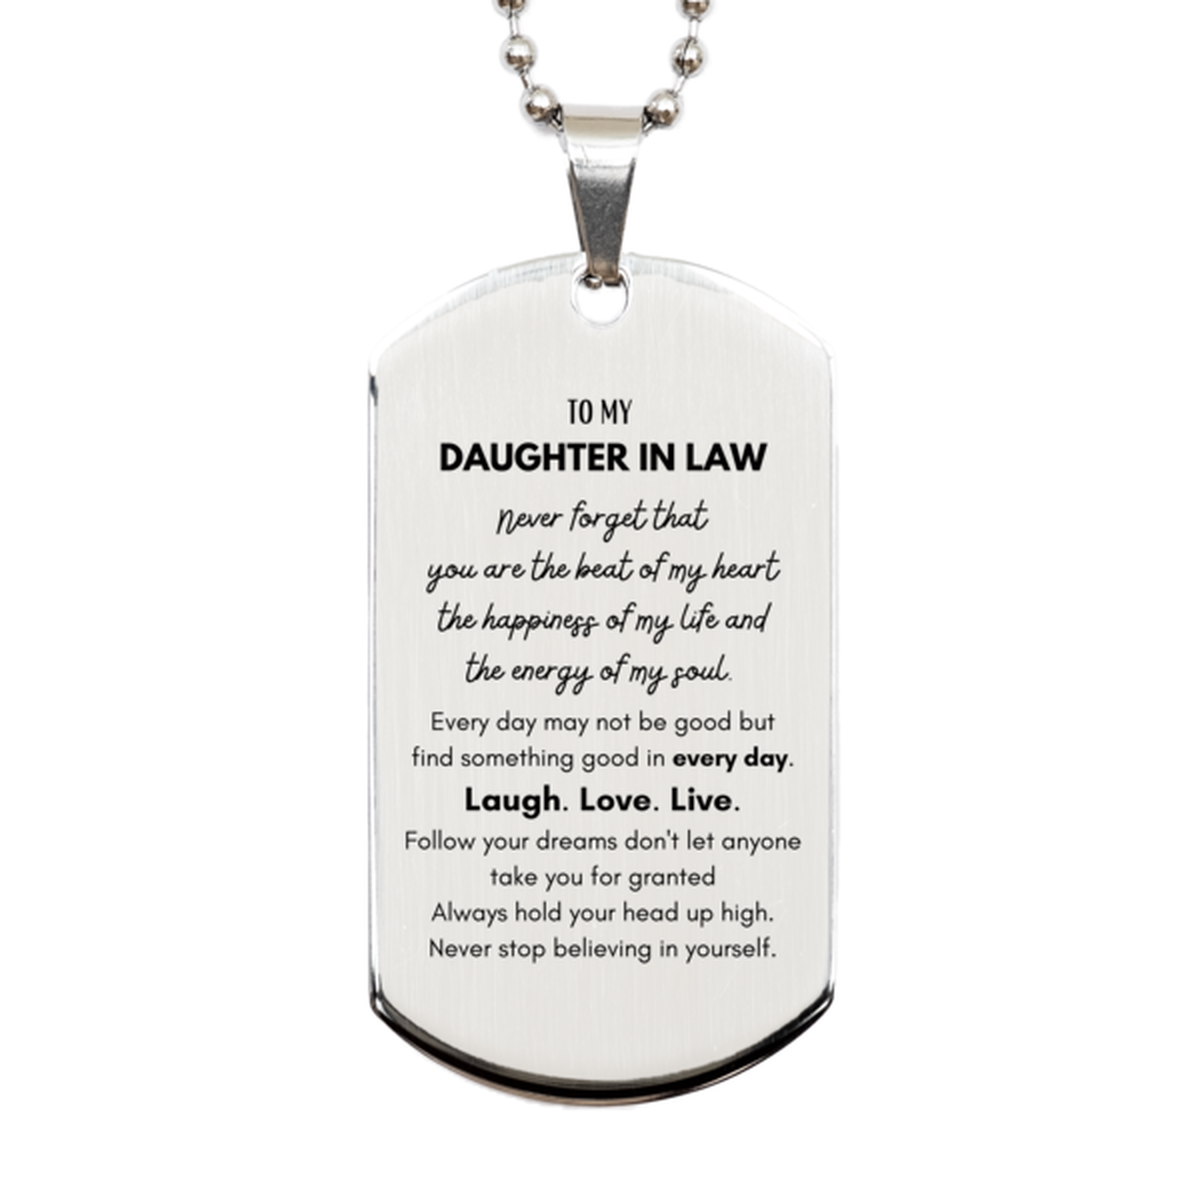 To My Daughter In Law Dogtag Gifts, Christmas Daughter In Law Silver Dog Tag Present, Birthday Unique Motivational For Daughter In Law, To My Daughter In Law Never forget that you are the beat of my heart the happiness of my life and the energy of my soul